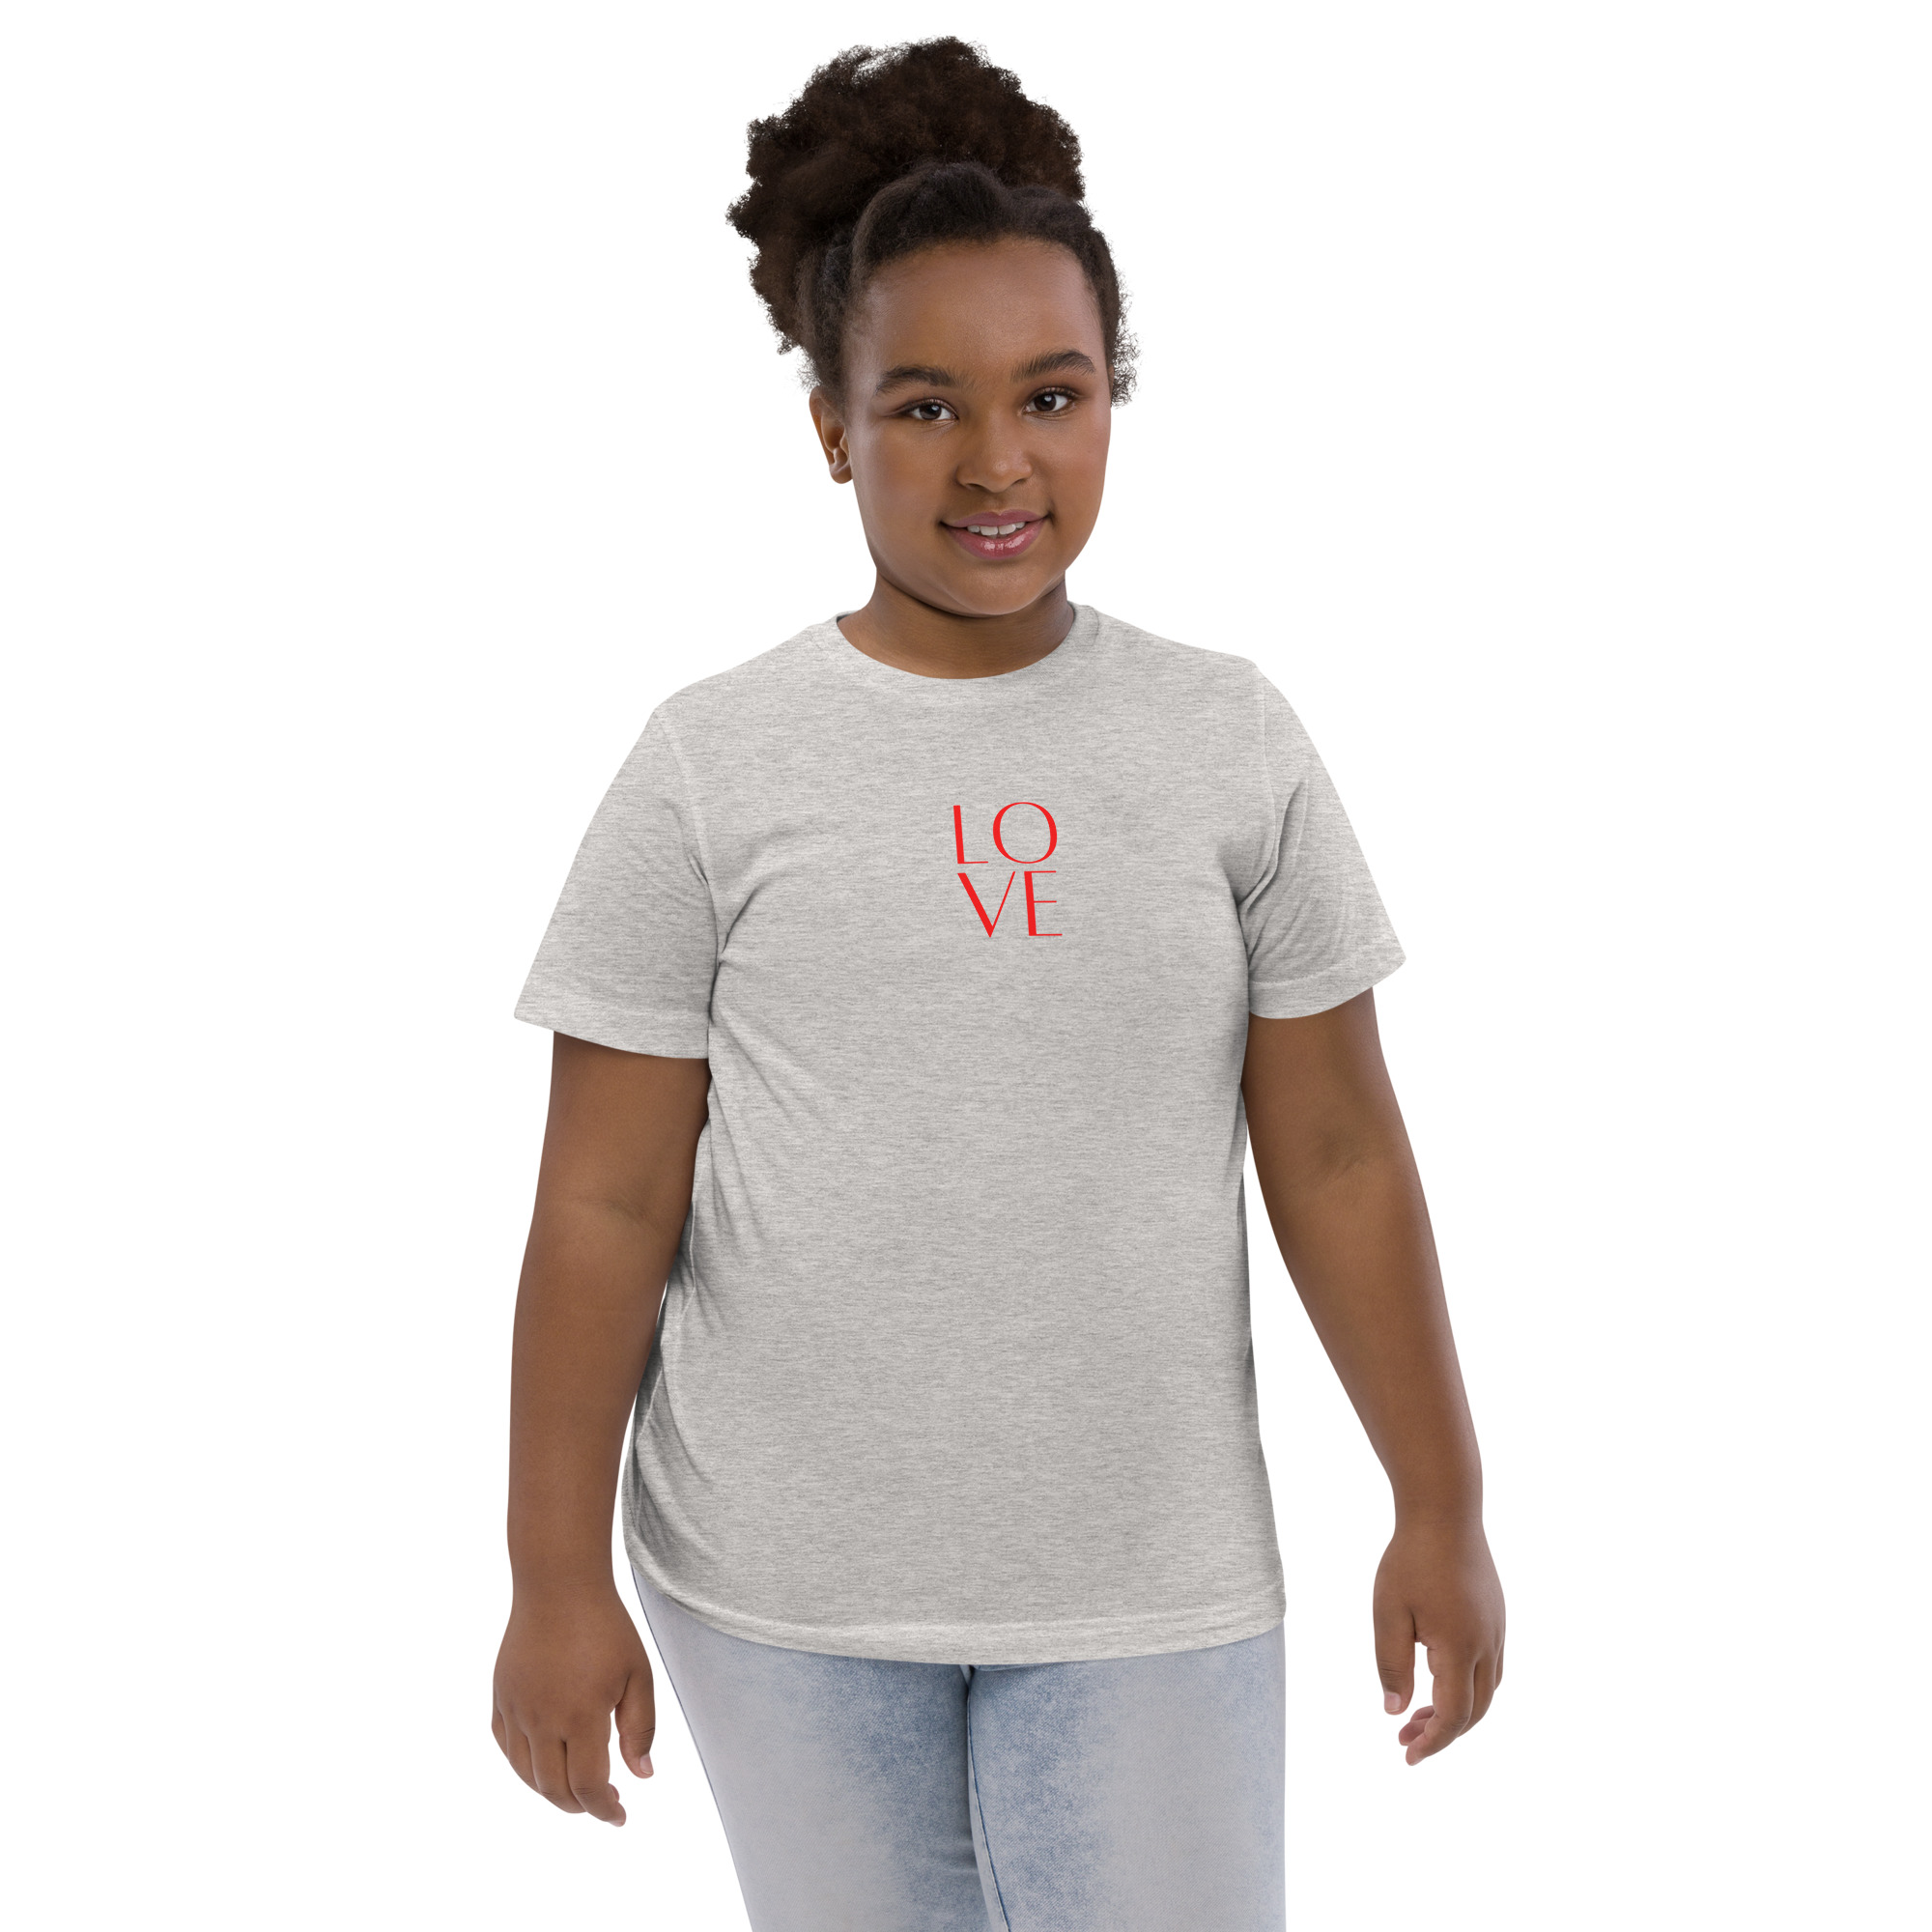 youth-jersey-t-shirt-heather-front-6384cb2a1cacb.jpg